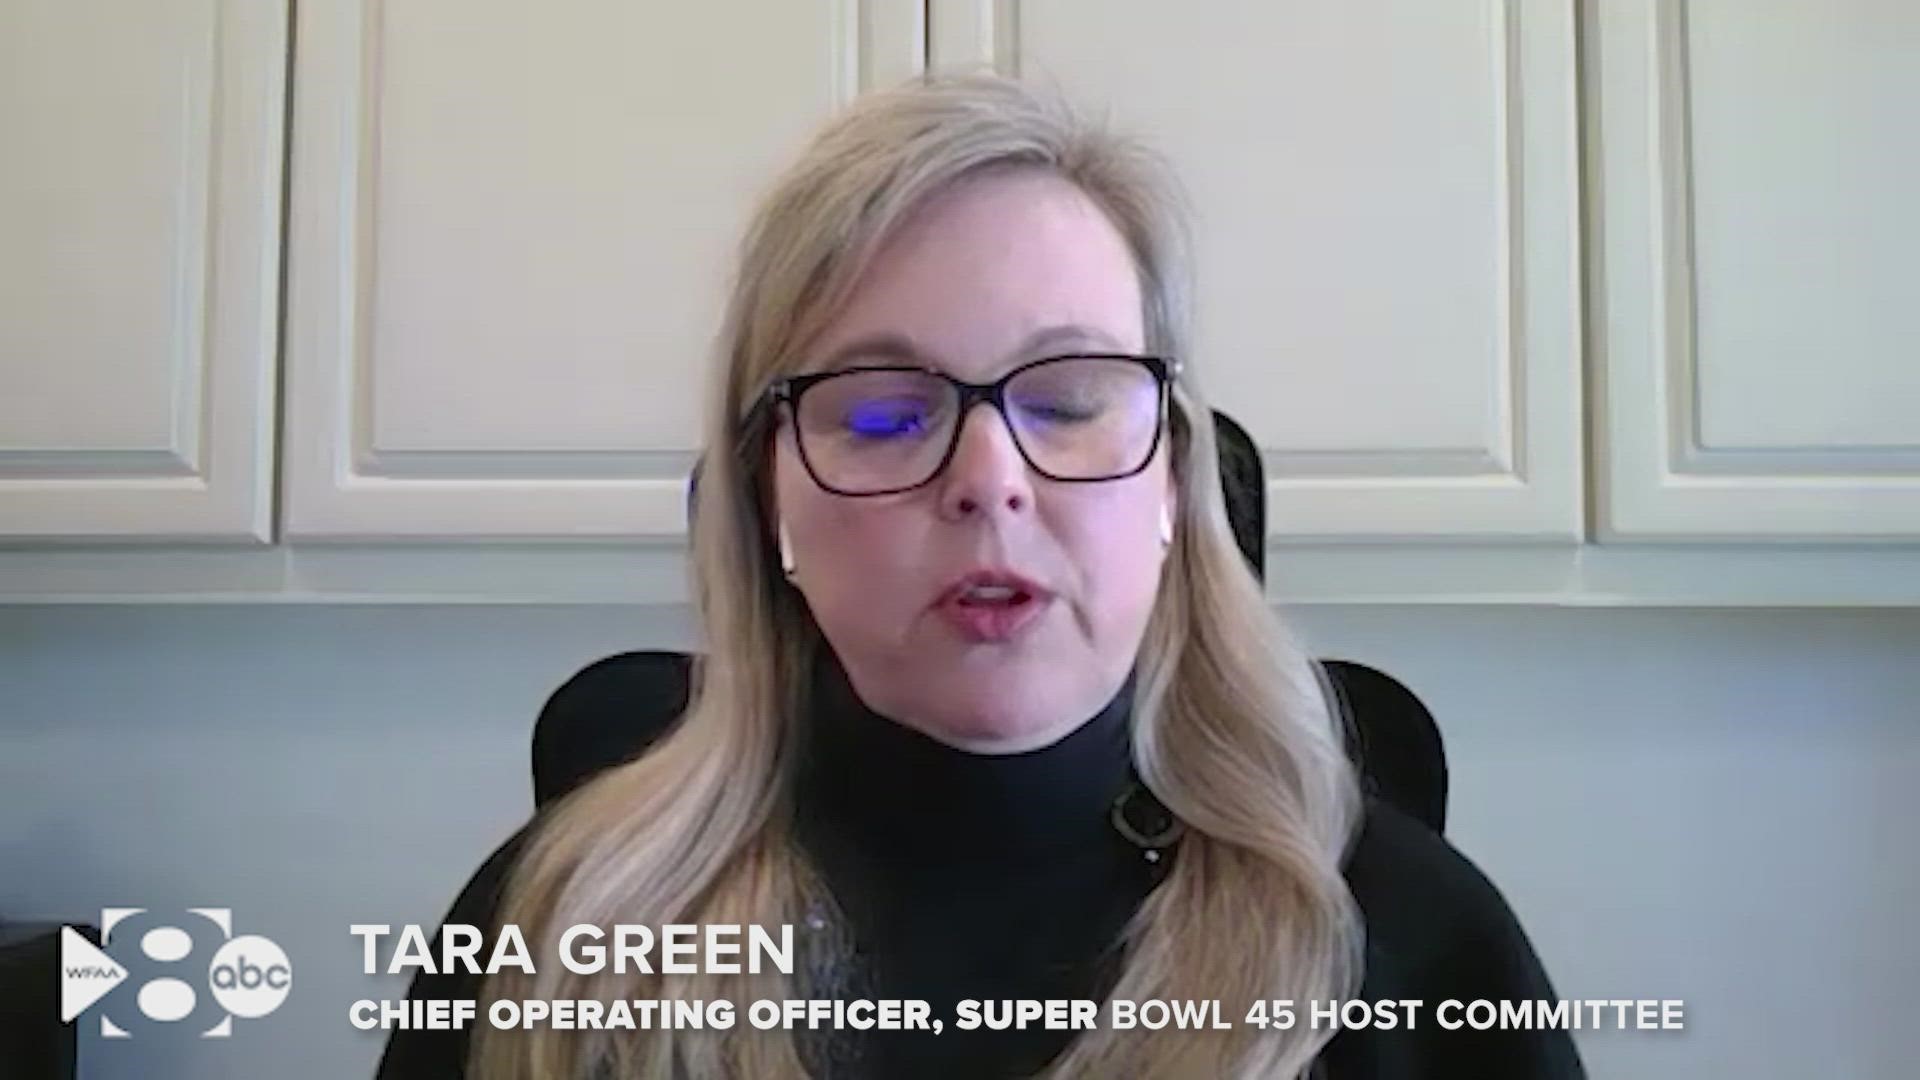 Tara Green, the COO of the Super Bowl host committee when it came to North Texas, said AT&T Stadium has the capability to host this year's Super Bowl, if it's moved.